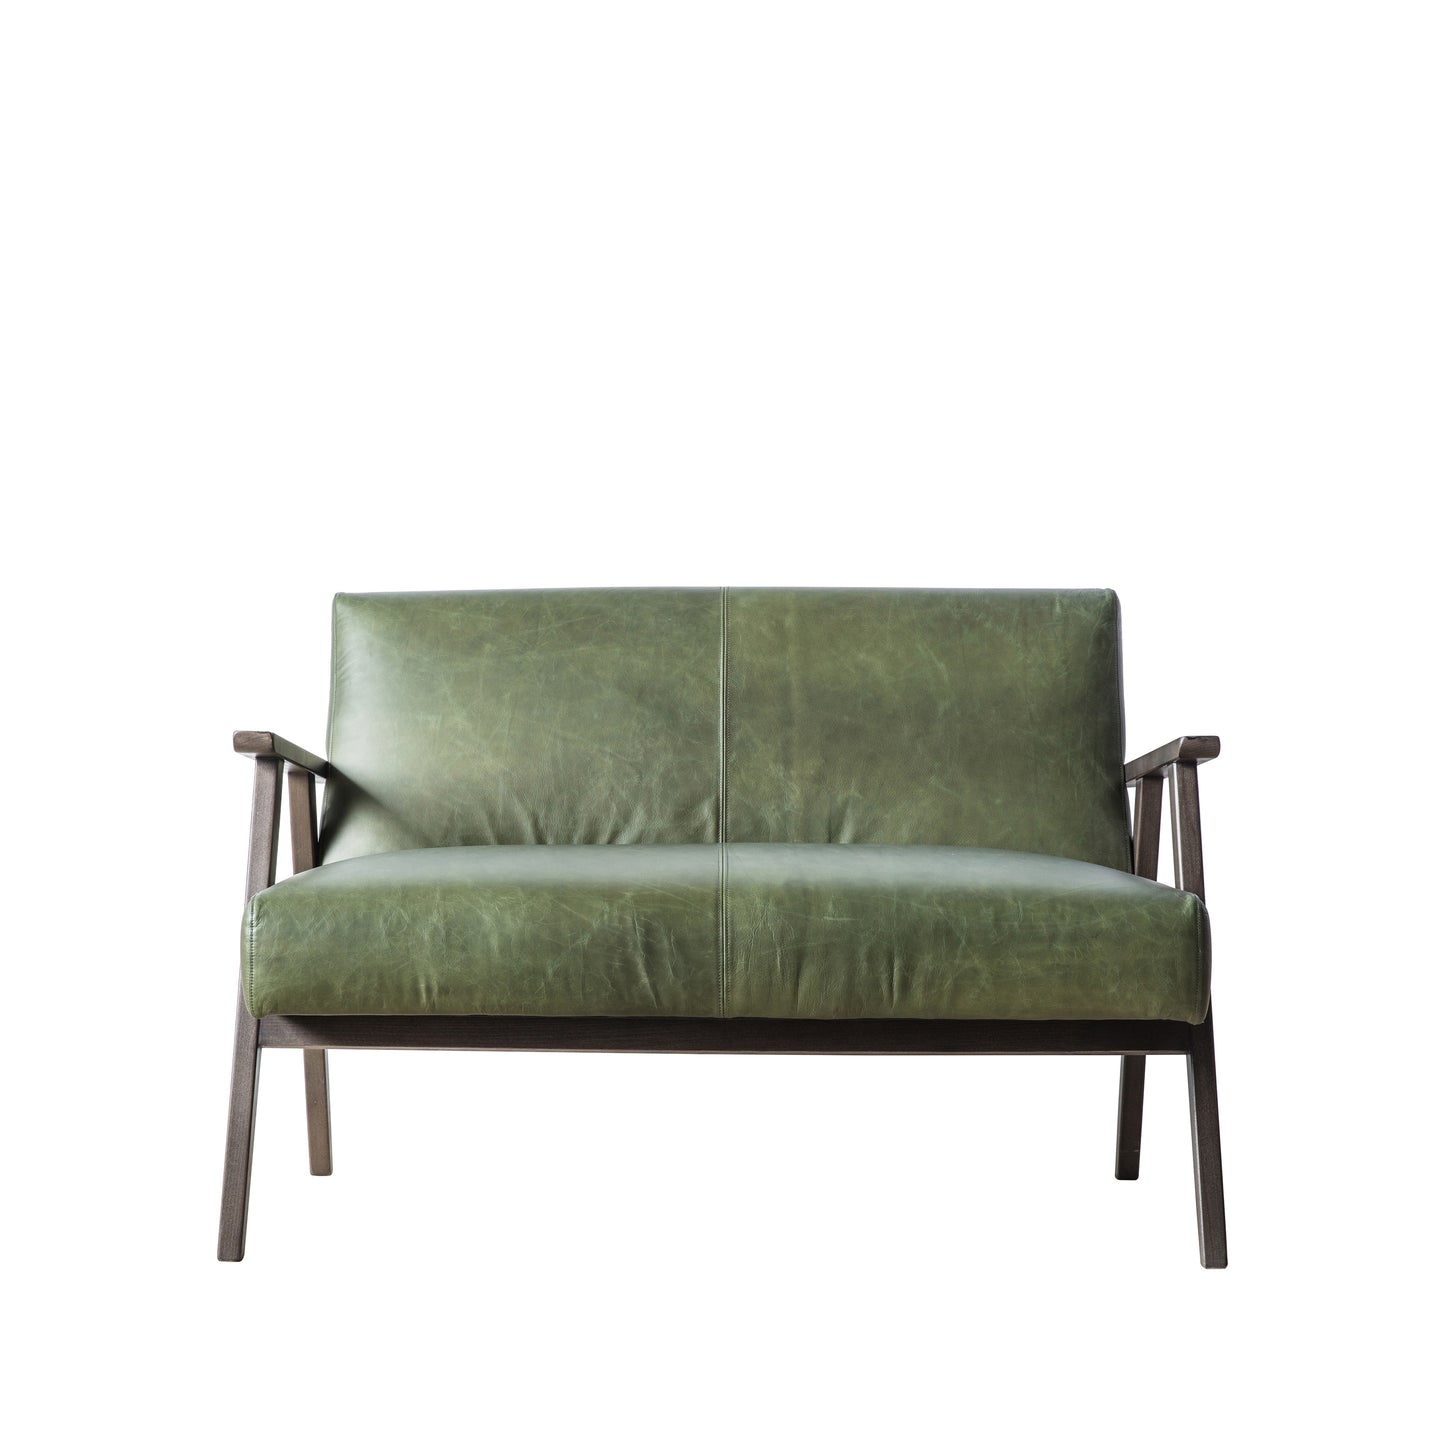 A Neyland 2 Seater Sofa in Heritage Green Leather for interior decor.